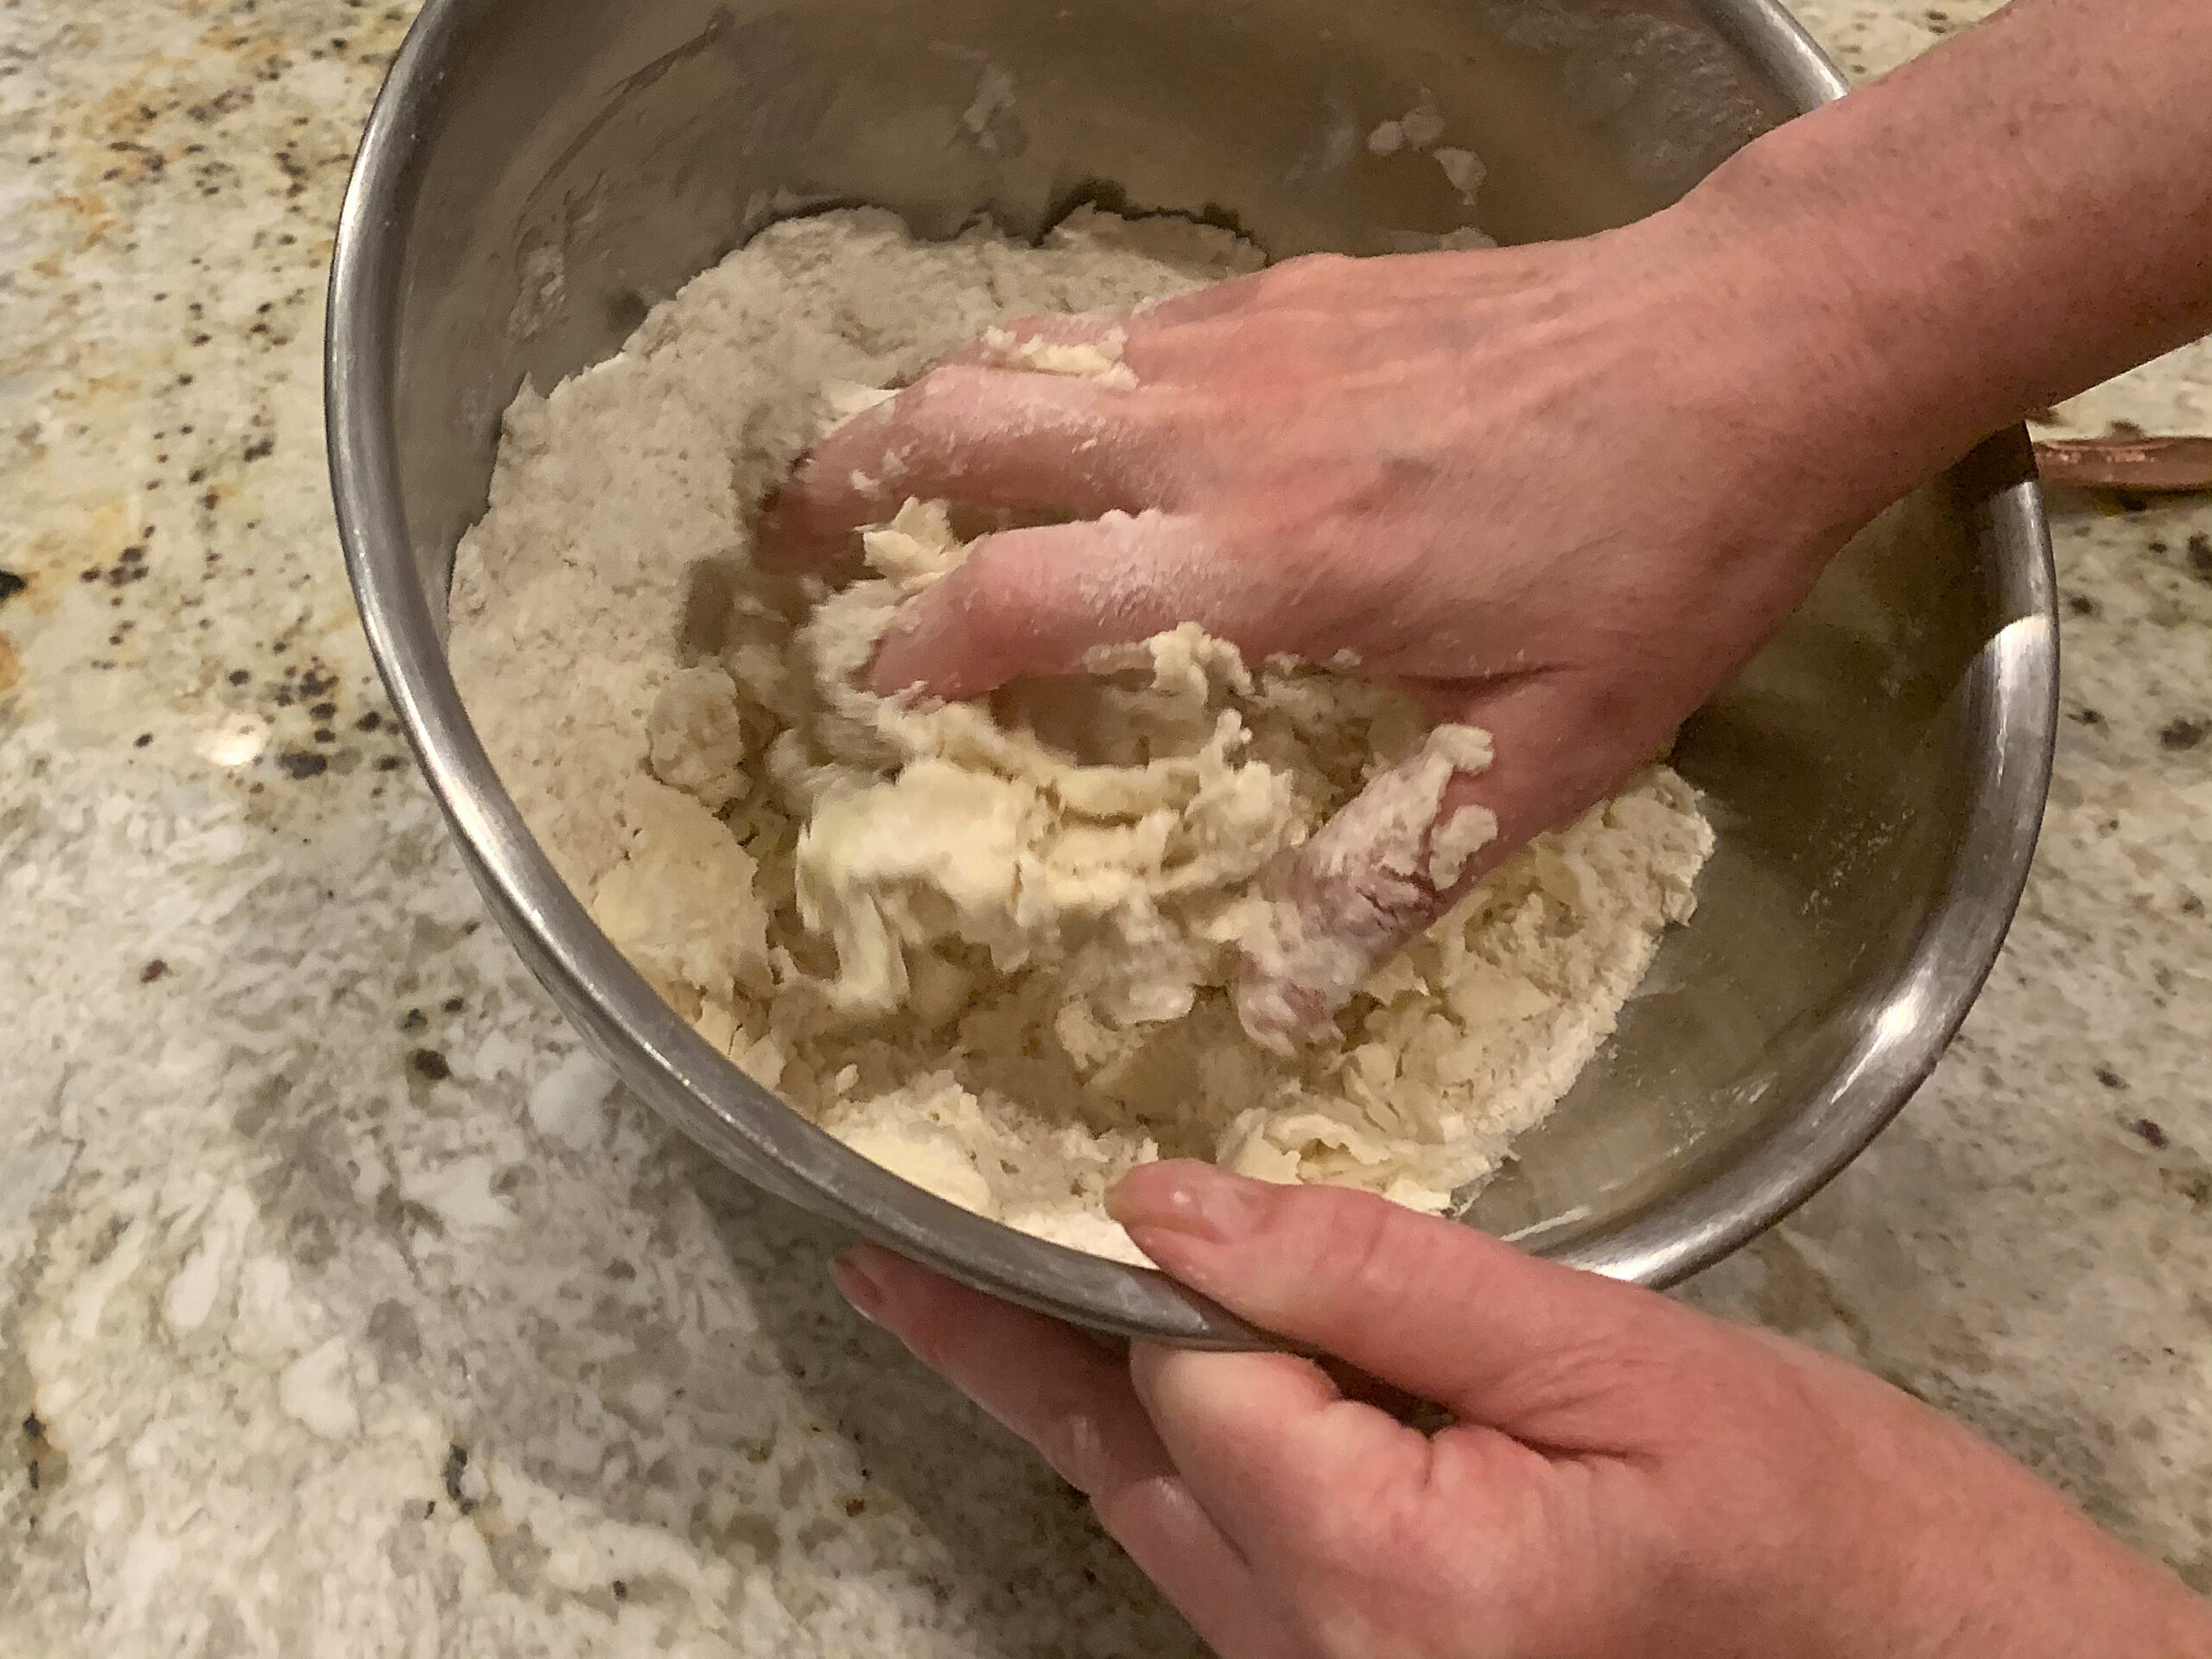 Caucasian hands mixing pastry dough in a steel bowl.